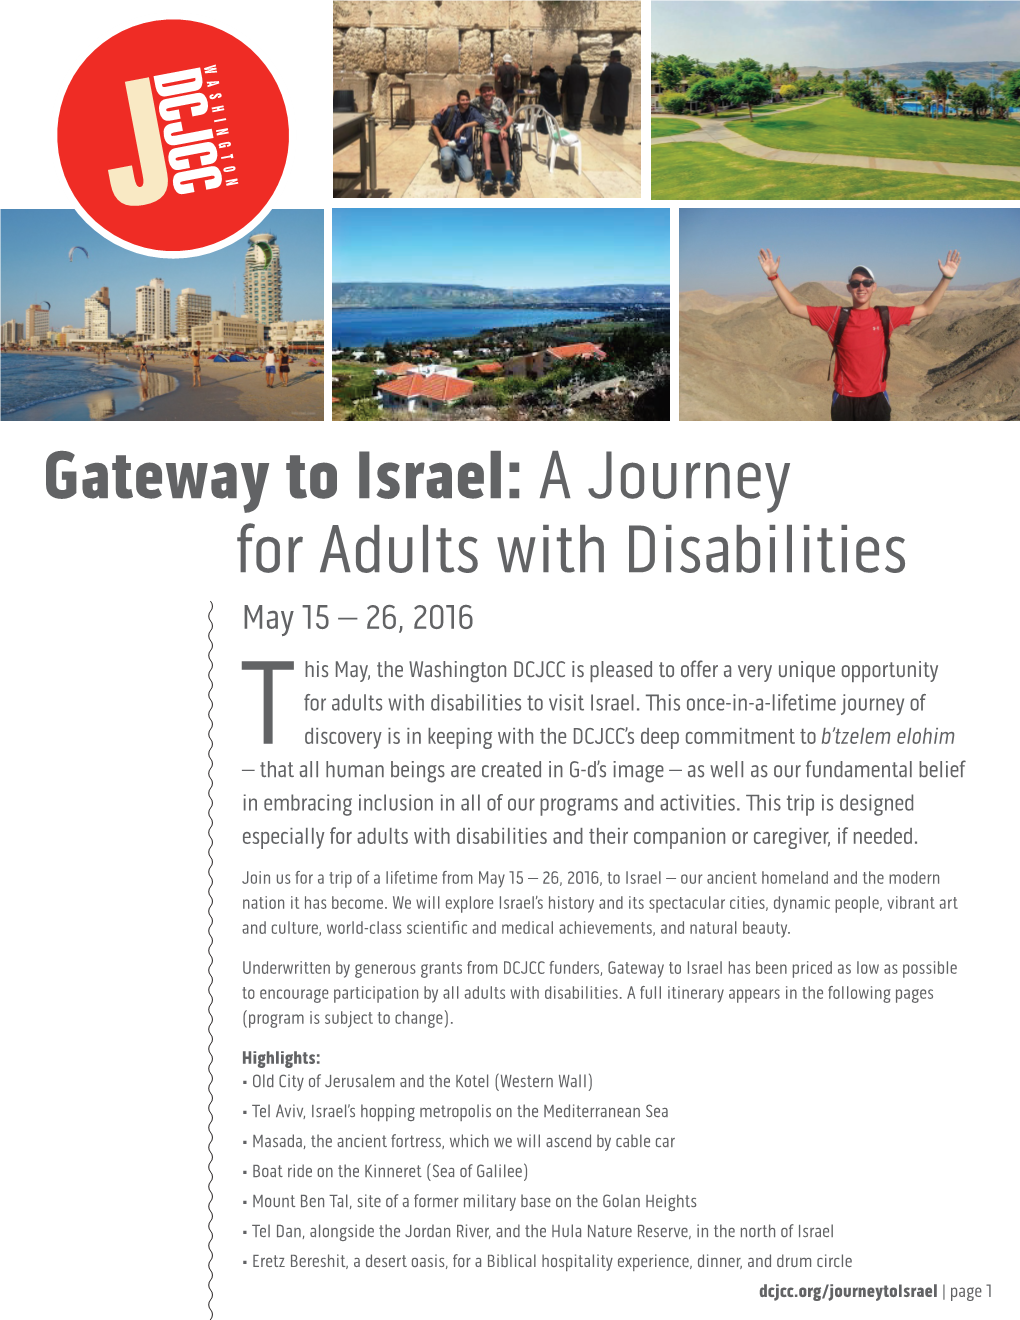 Gateway to Israel: a Journey for Adults with Disabilities